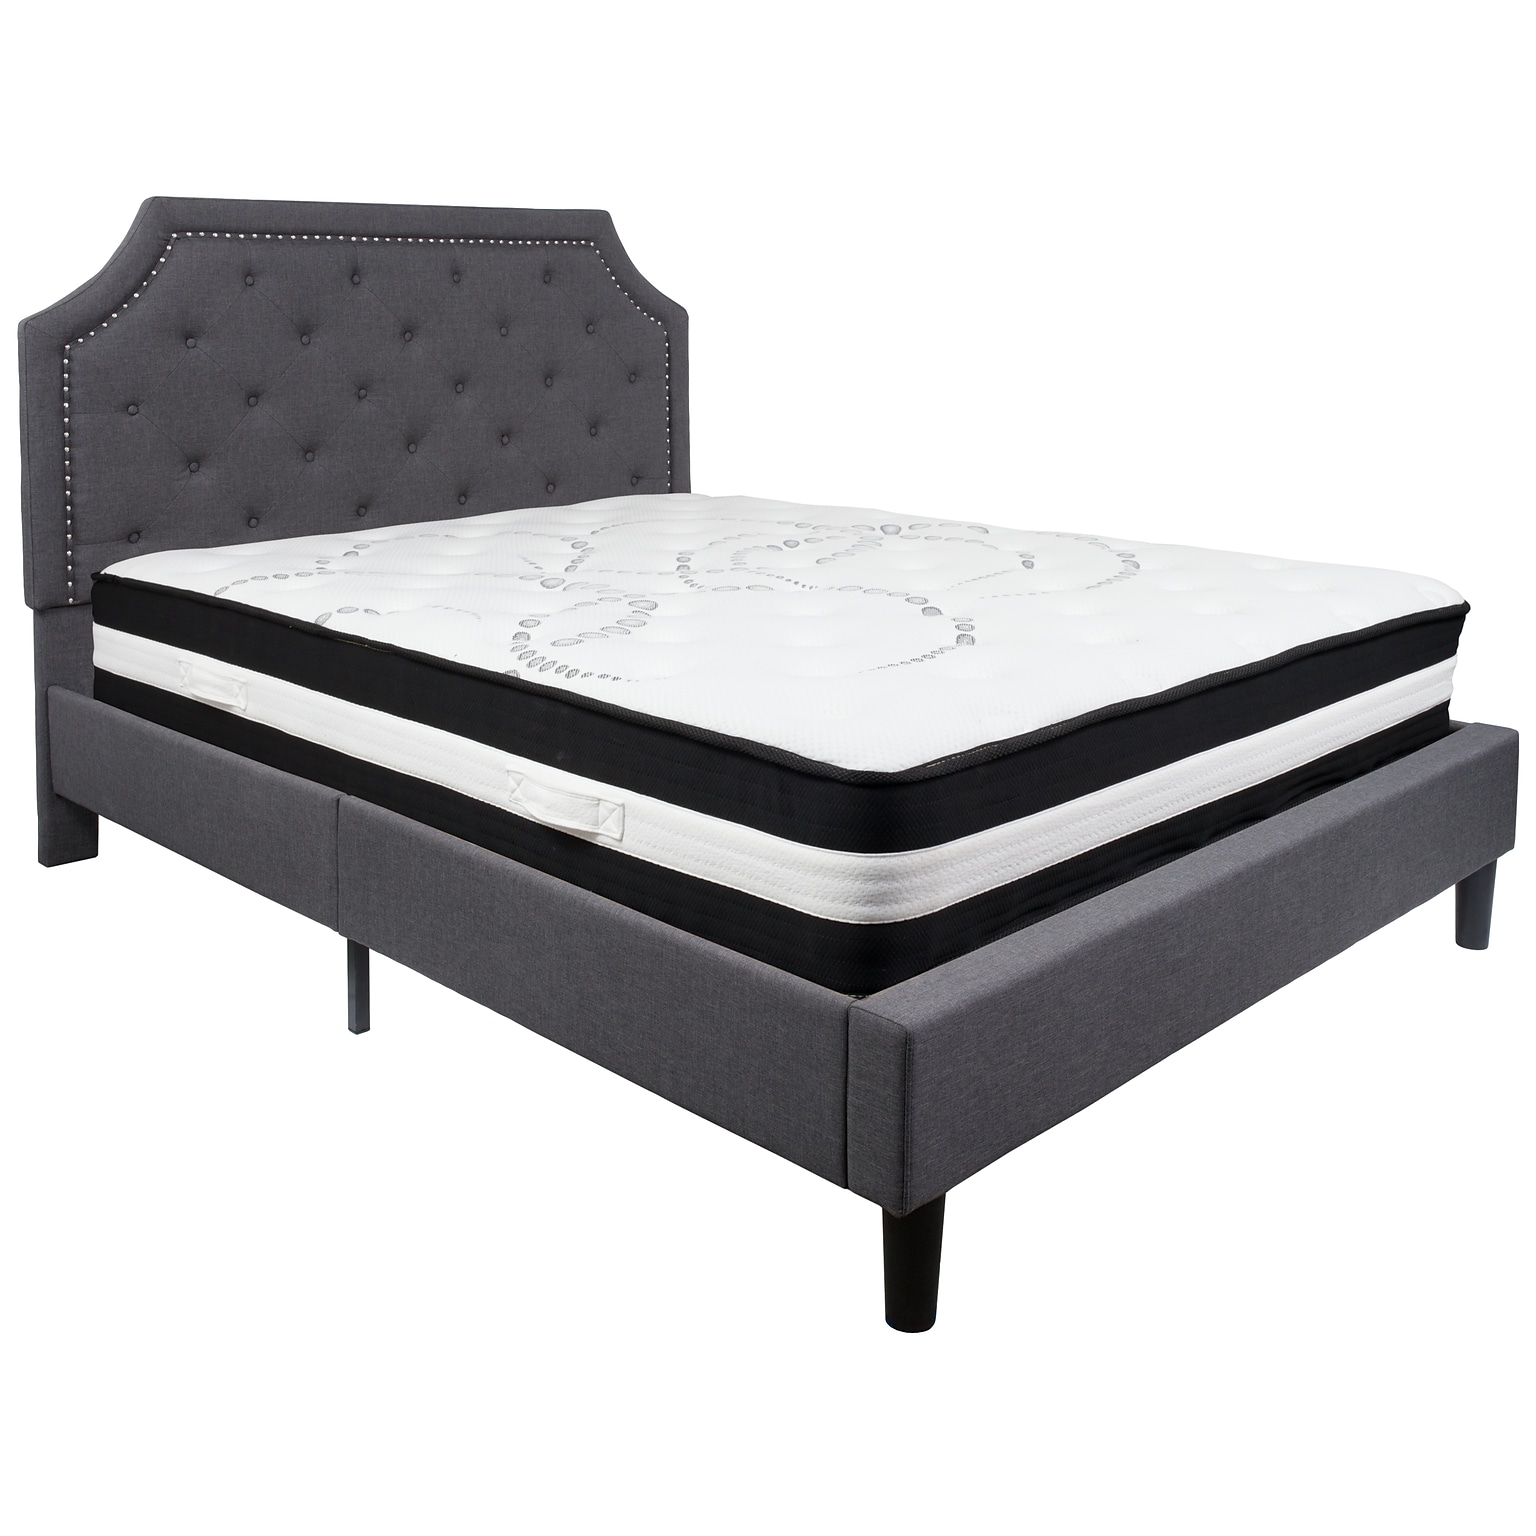 Flash Furniture Brighton Tufted Upholstered Platform Bed in Dark Gray Fabric with Pocket Spring Mattress, Queen (SLBM15)